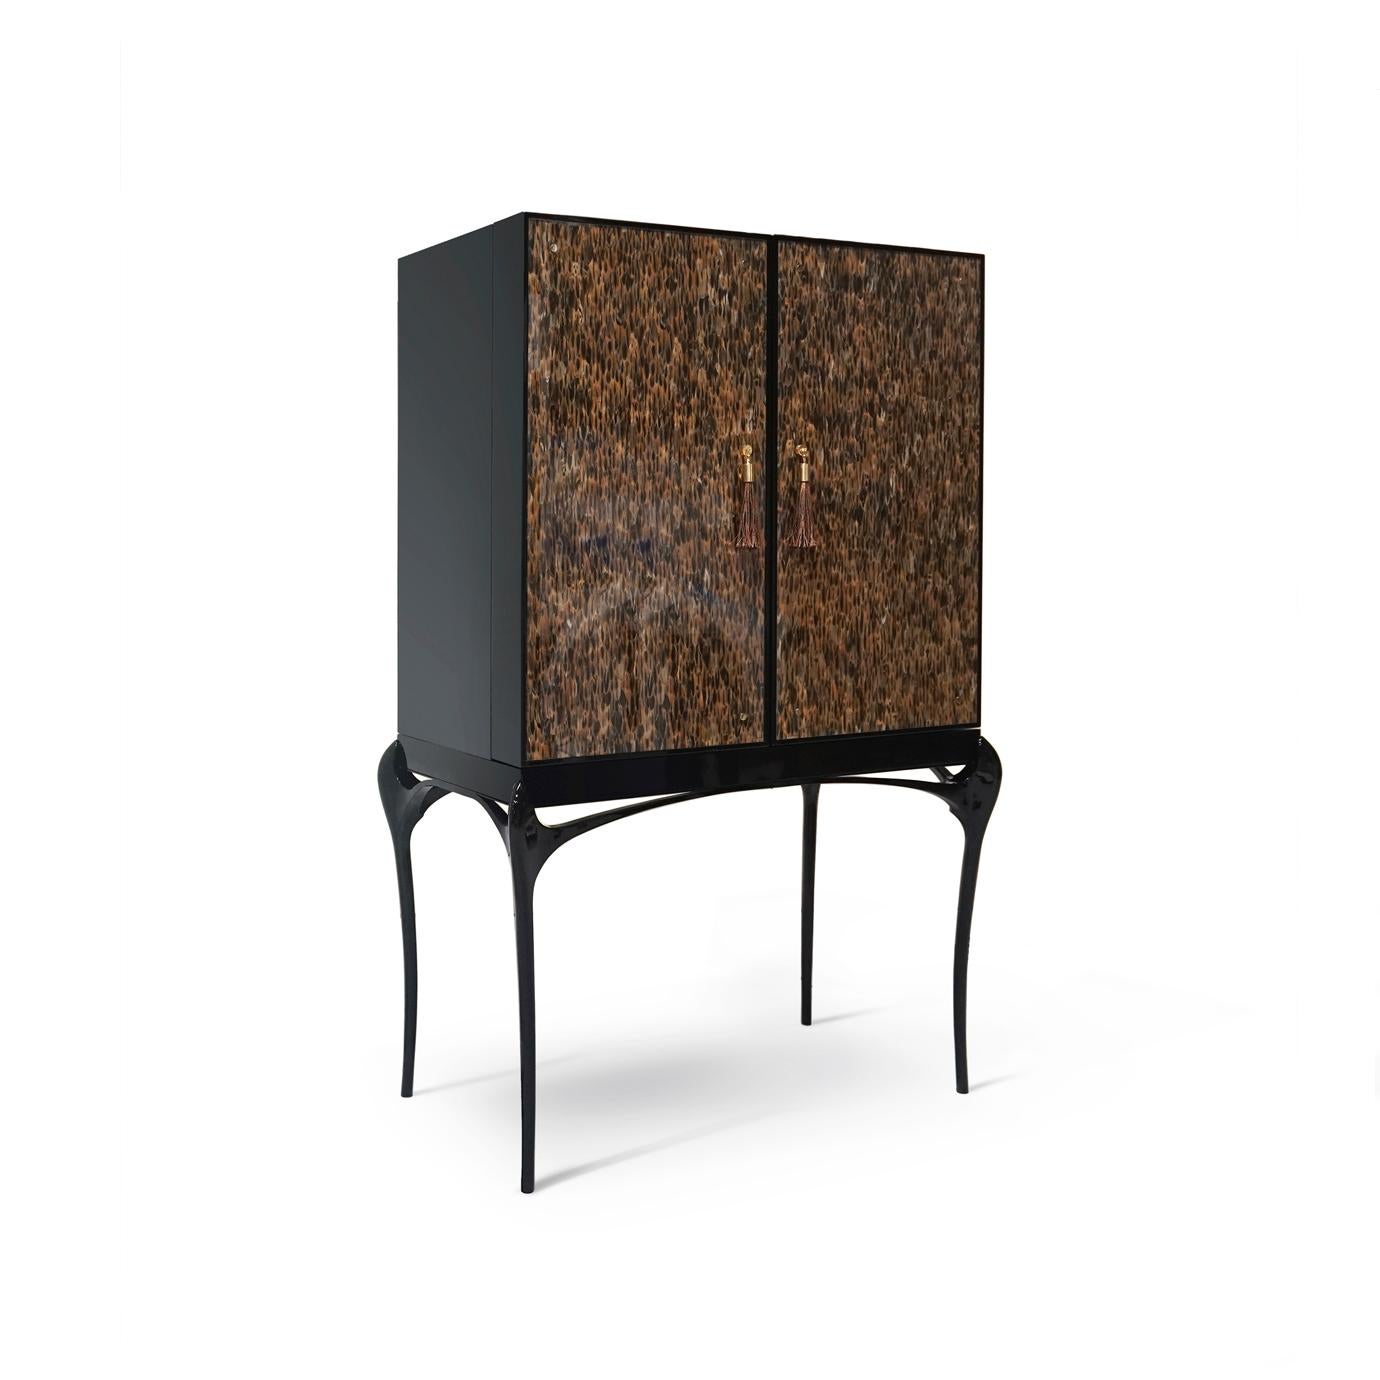 Enticing admirers with its exotic feather doors and sexy curved lacquered legs, the Temptation Bar Cabinet will steal cocktail hour. The chic black and gold interior is perfectly designed to store your wine and cocktail accouterments. Open or closed